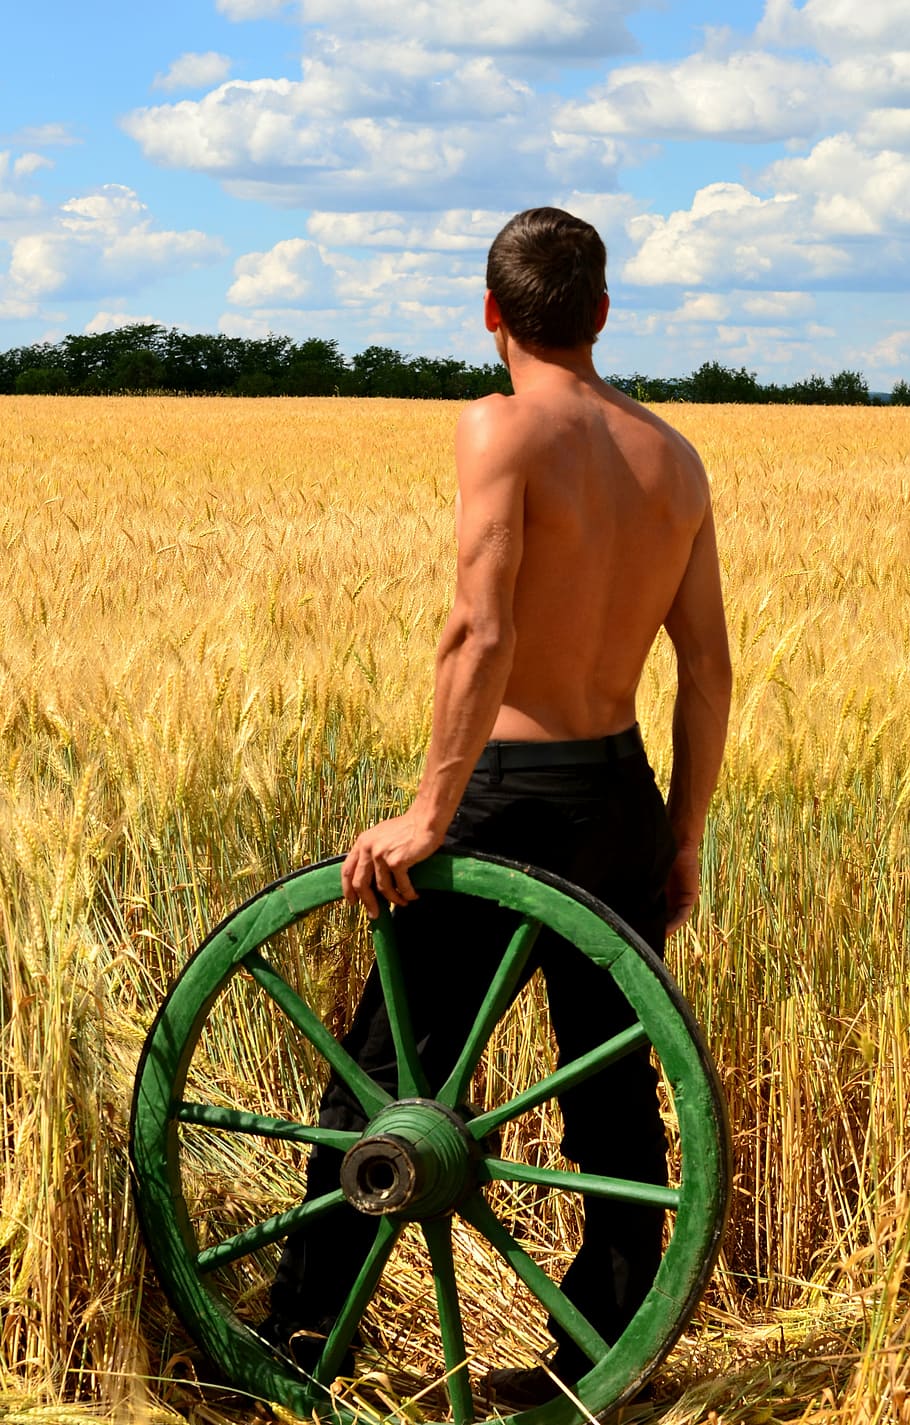 man standing on wheat field holding barrel wheel, young men, peasant carts